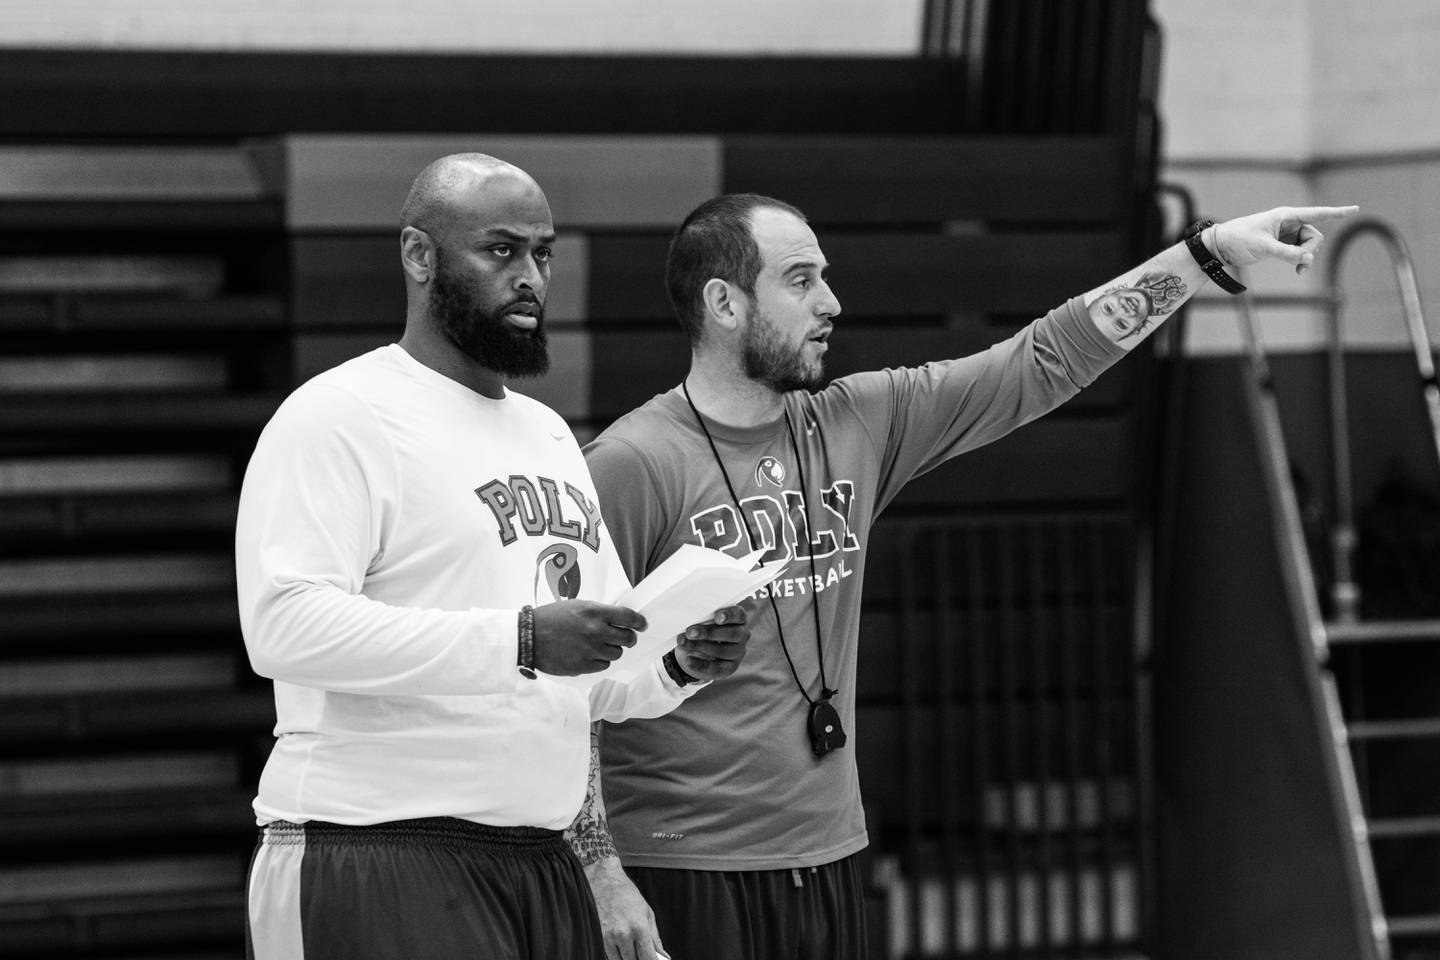 Sam Brand with Anthony Fitzgerald, his long-time assistant coach at Baltimore Polytechnic Institute. Fitzgerald is now the Assistant Director at Team Melo.